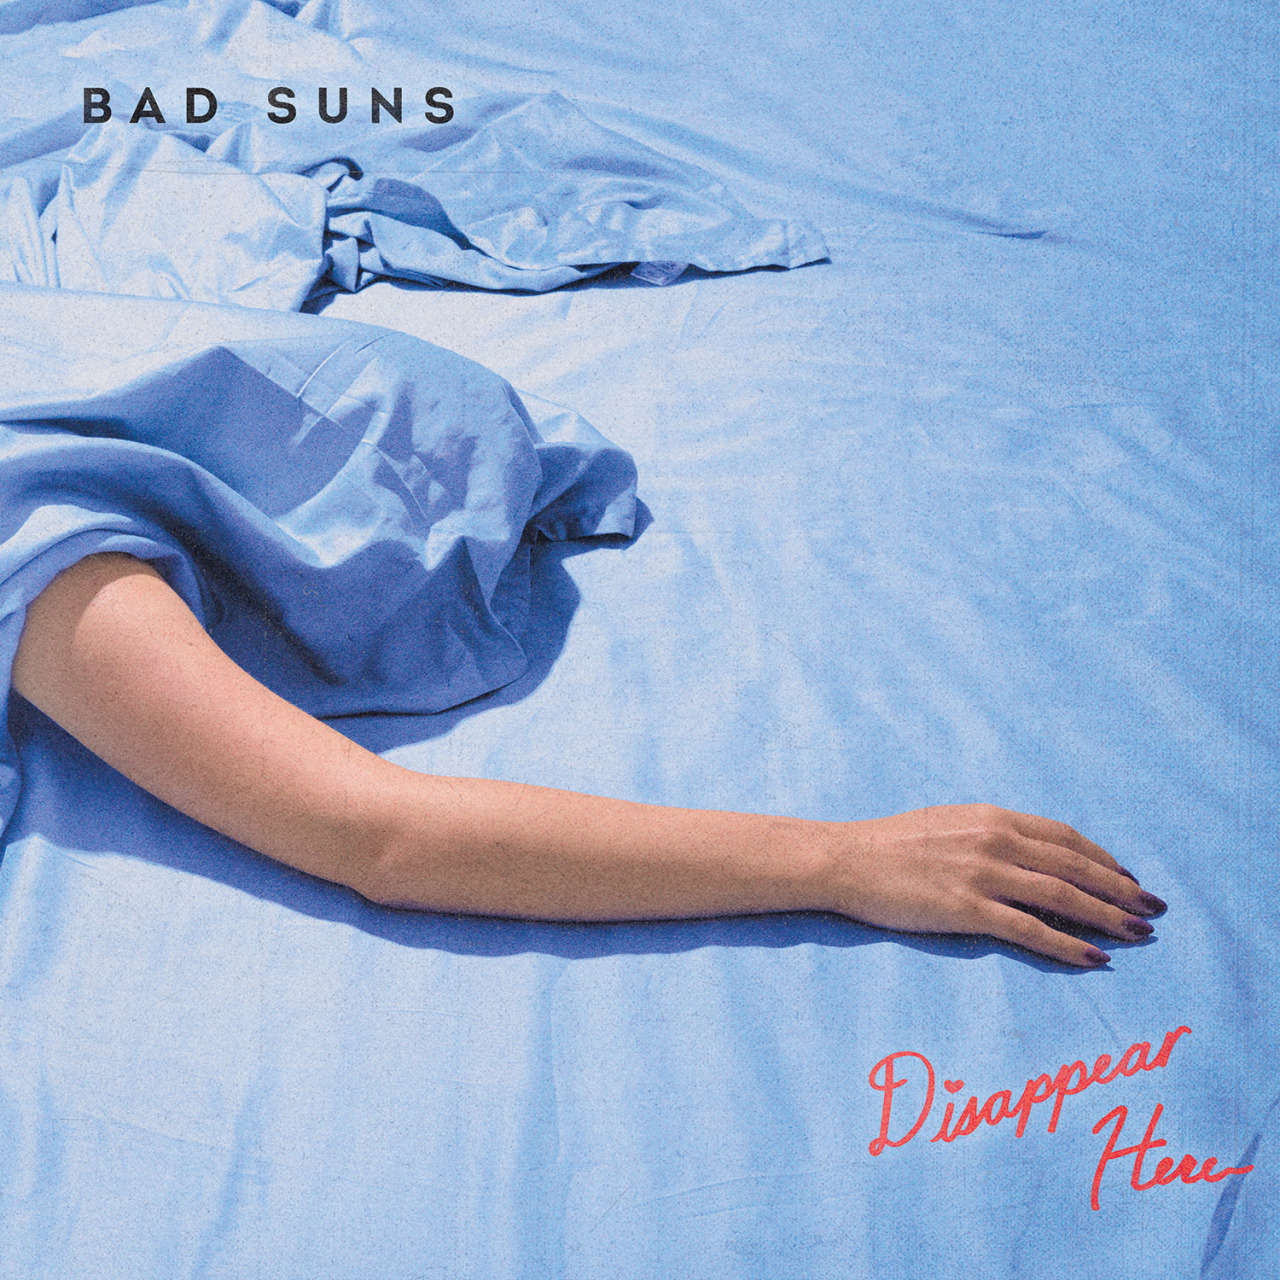 Disappear Here - Bad Suns